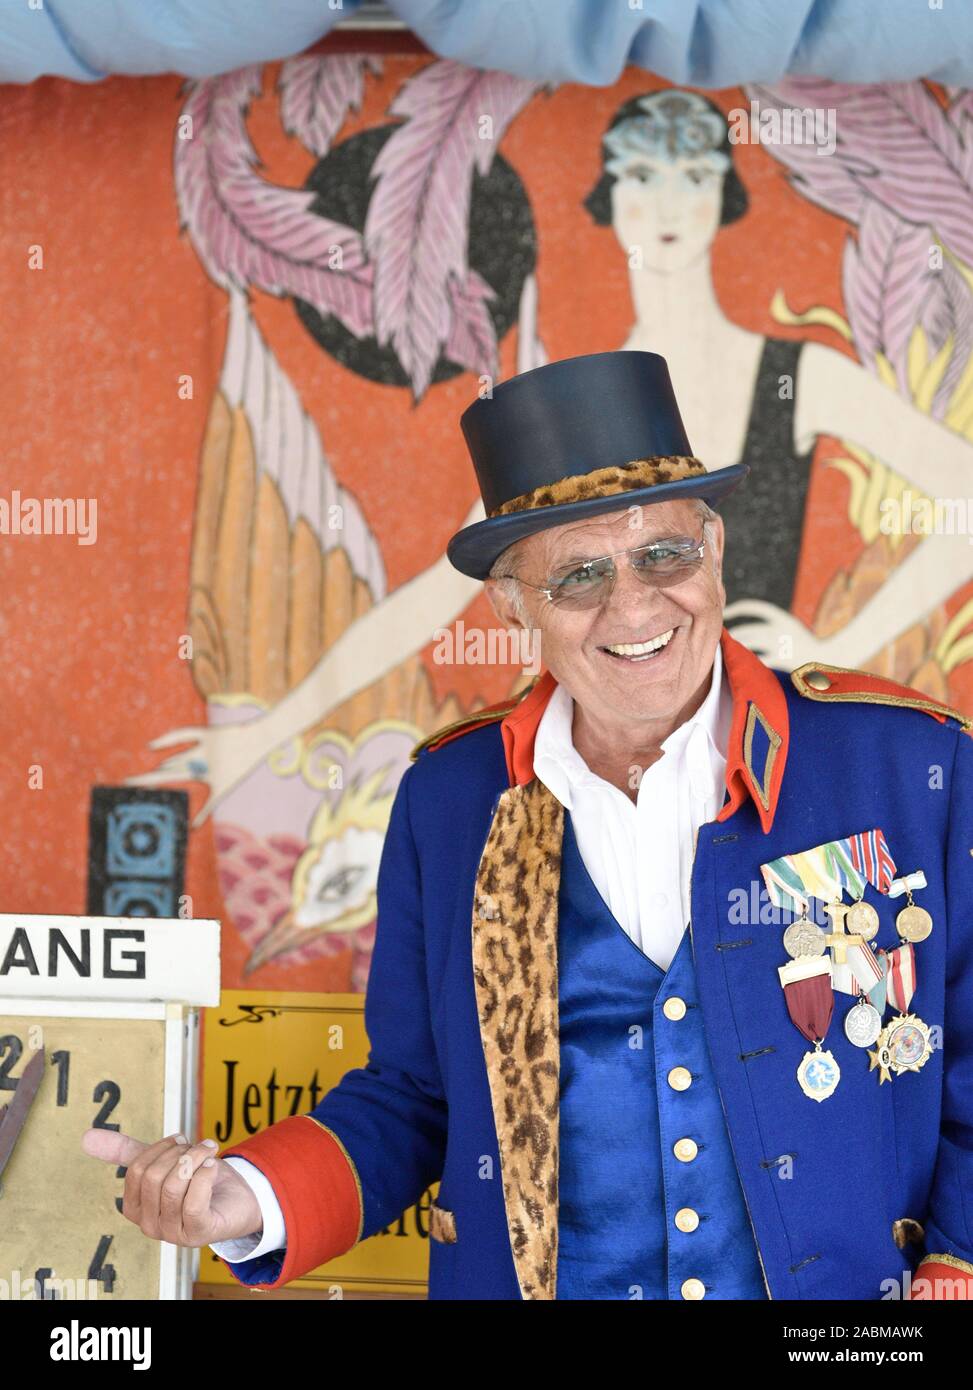 Manfred Schauer has been running the traditional Schichtl Variety Theatre since 1985, which has been in existence at the Oktoberfest for 150 years. [automated translation] Stock Photo